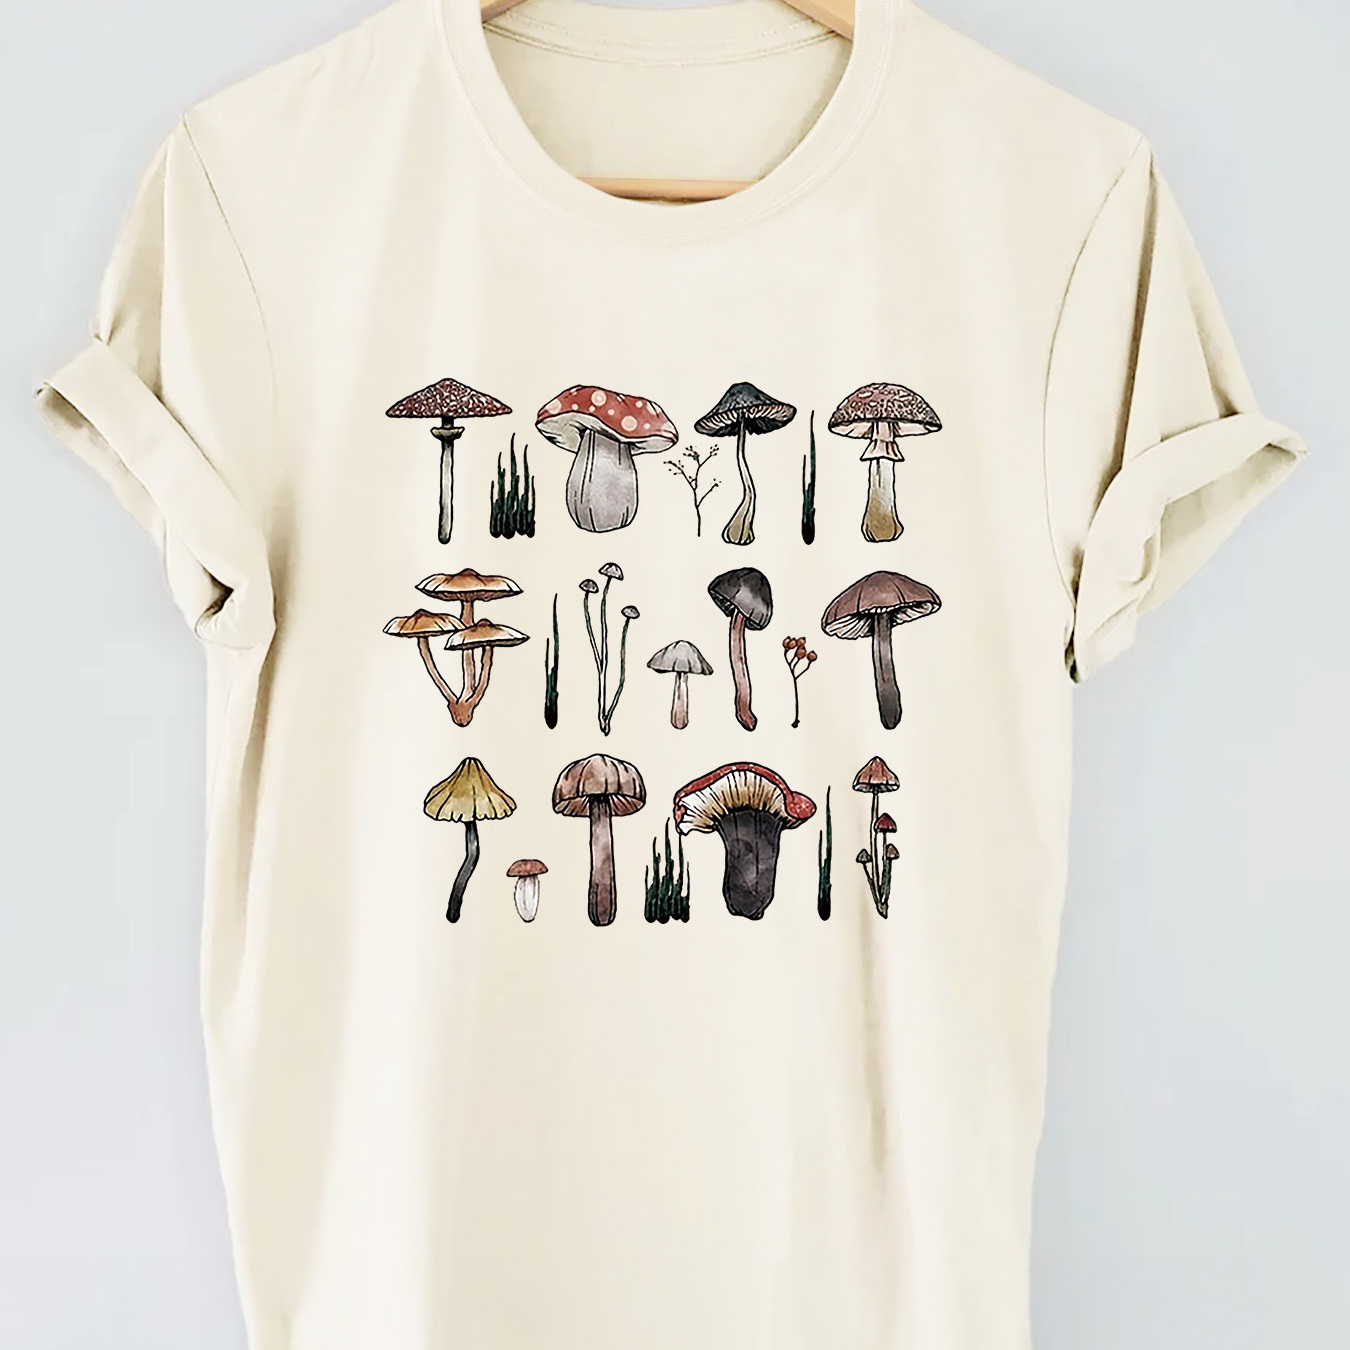 

Mushroom Graphic Print T-shirt, Short Sleeve Crew Neck Casual Top For Summer & Spring, Women's Clothing